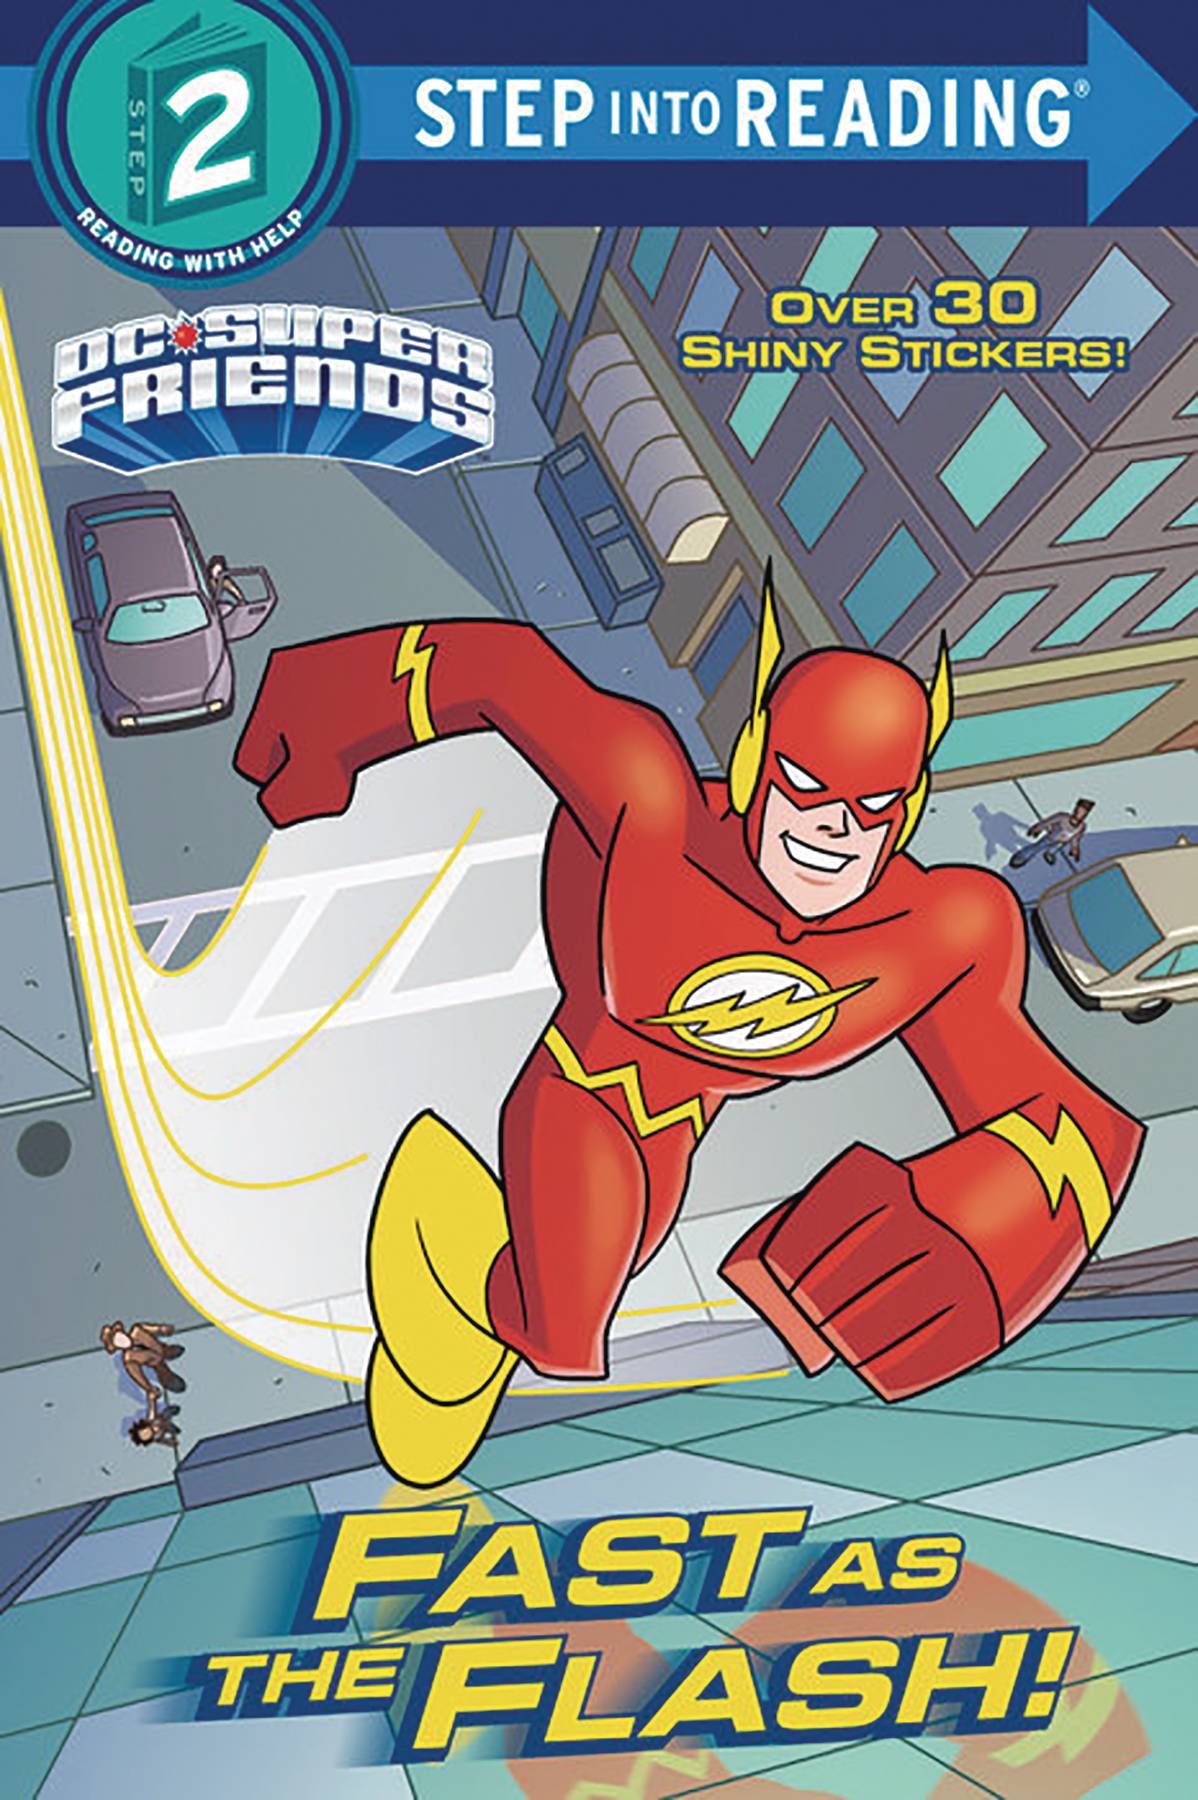 DC Super Friends Fast As The Flash Young Reader Soft Cover